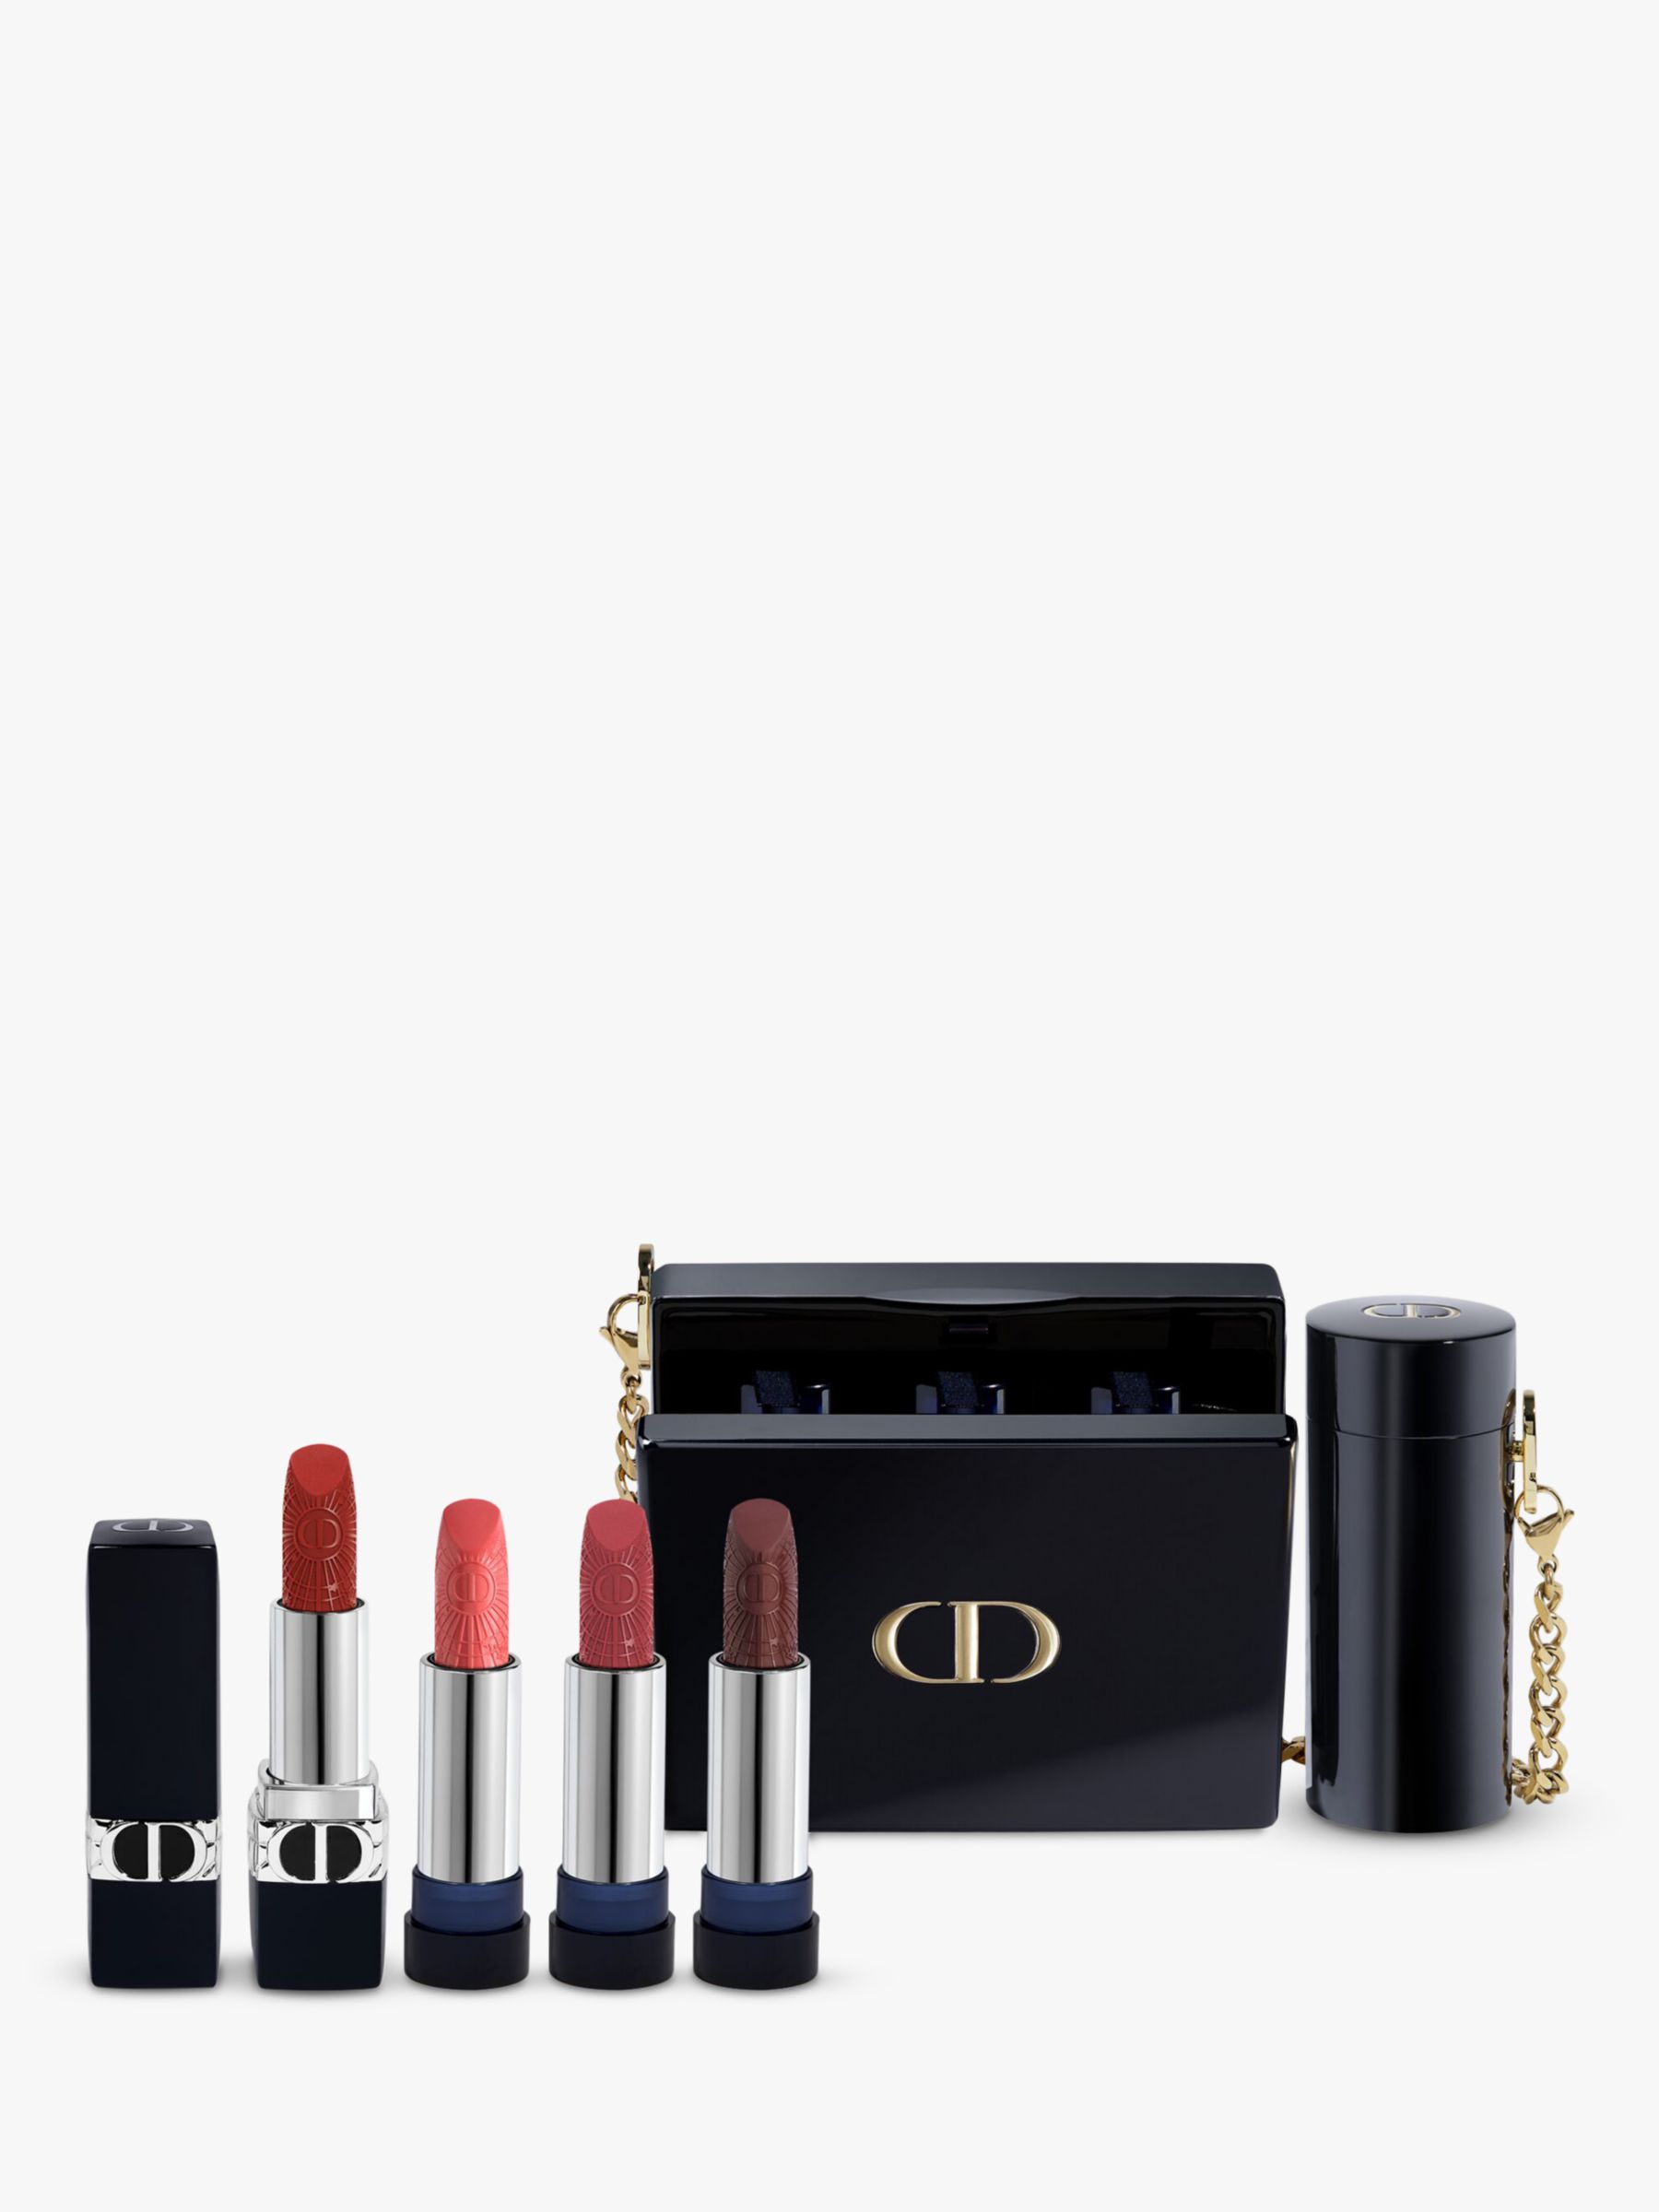 DIOR Rouge DIOR Minaudière and Lipstick Holder The Atelier of Dreams Limited Edition Makeup Gift Set